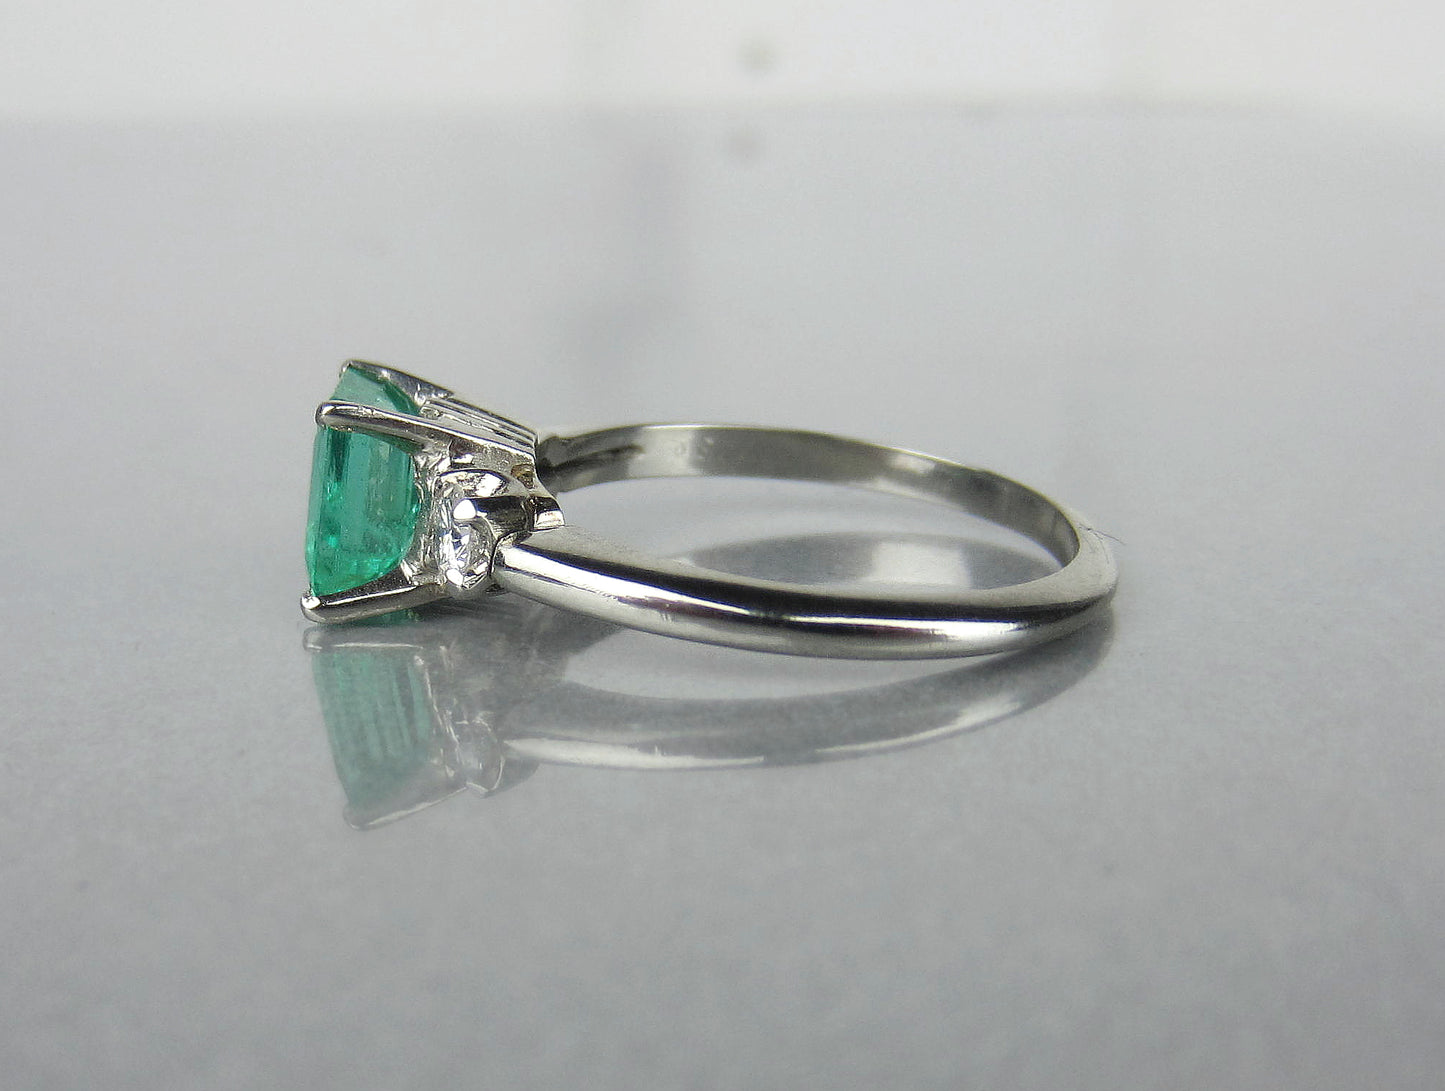 SOLD--Vintage Emerald 1.80ct and Diamond Ring 18k